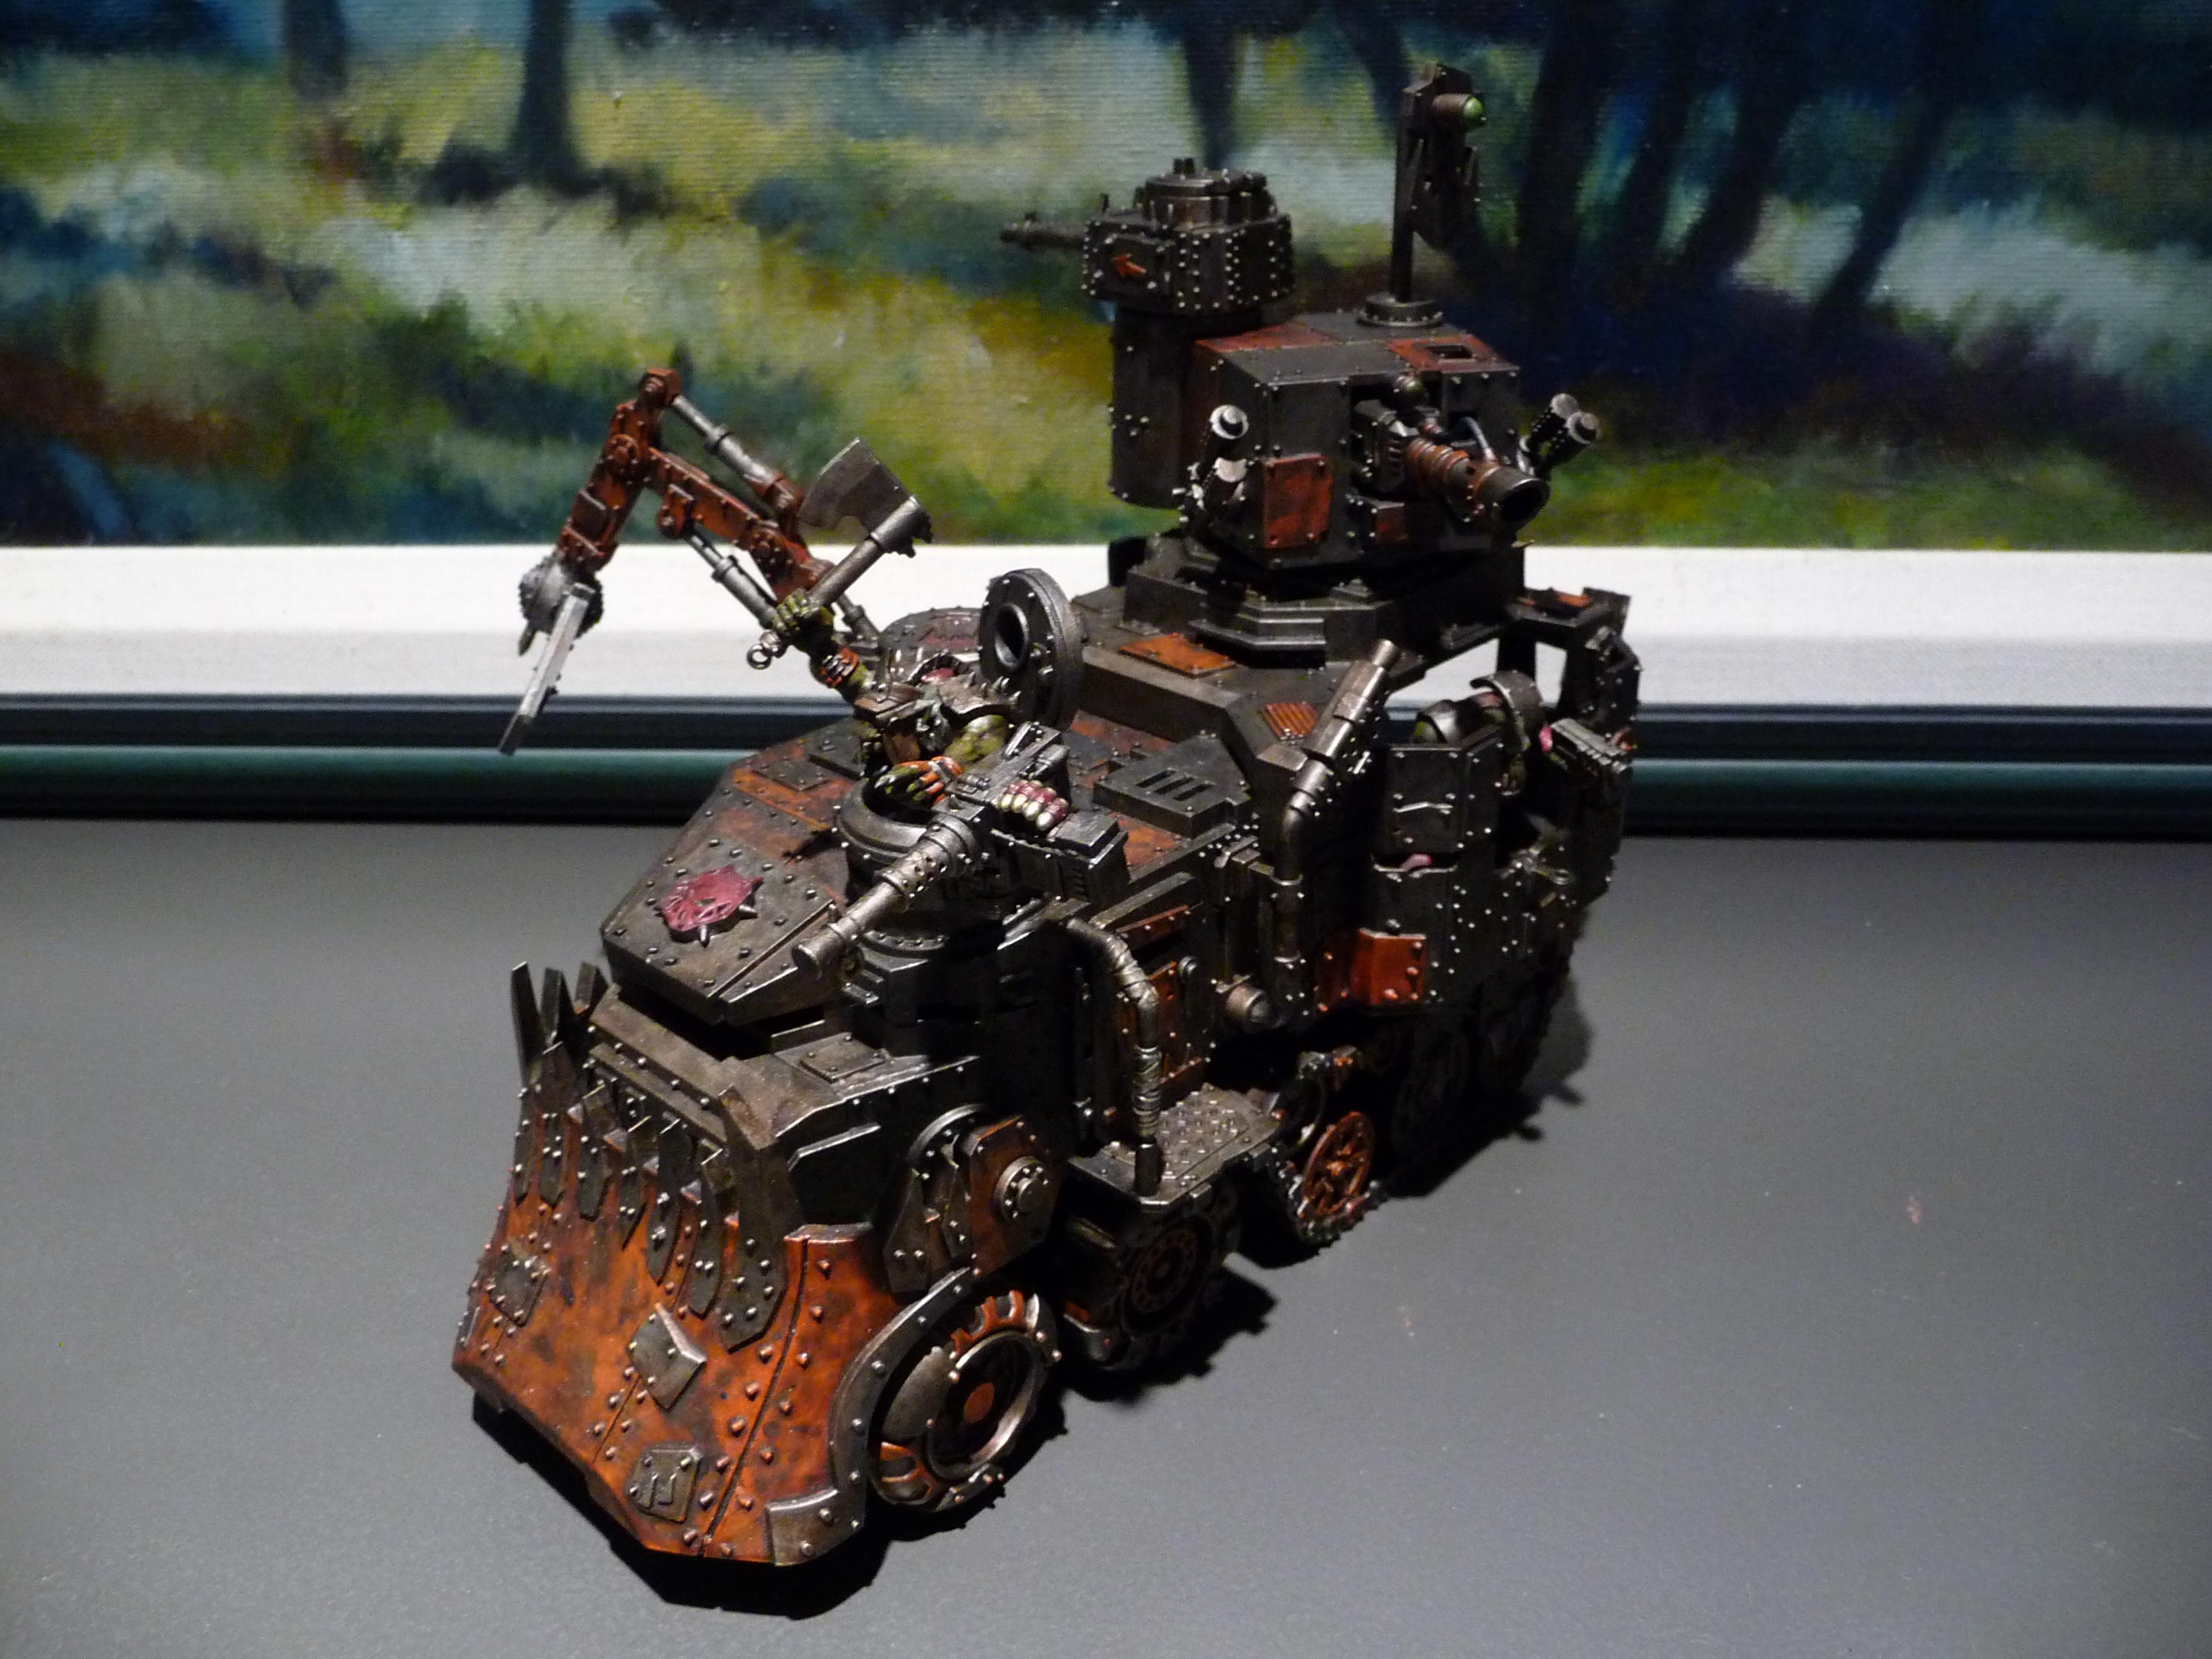 Battlewagon, Orks, GET ME KLOSER!!!  I WANA HIT THEM WITH MY AXE!!!!!!